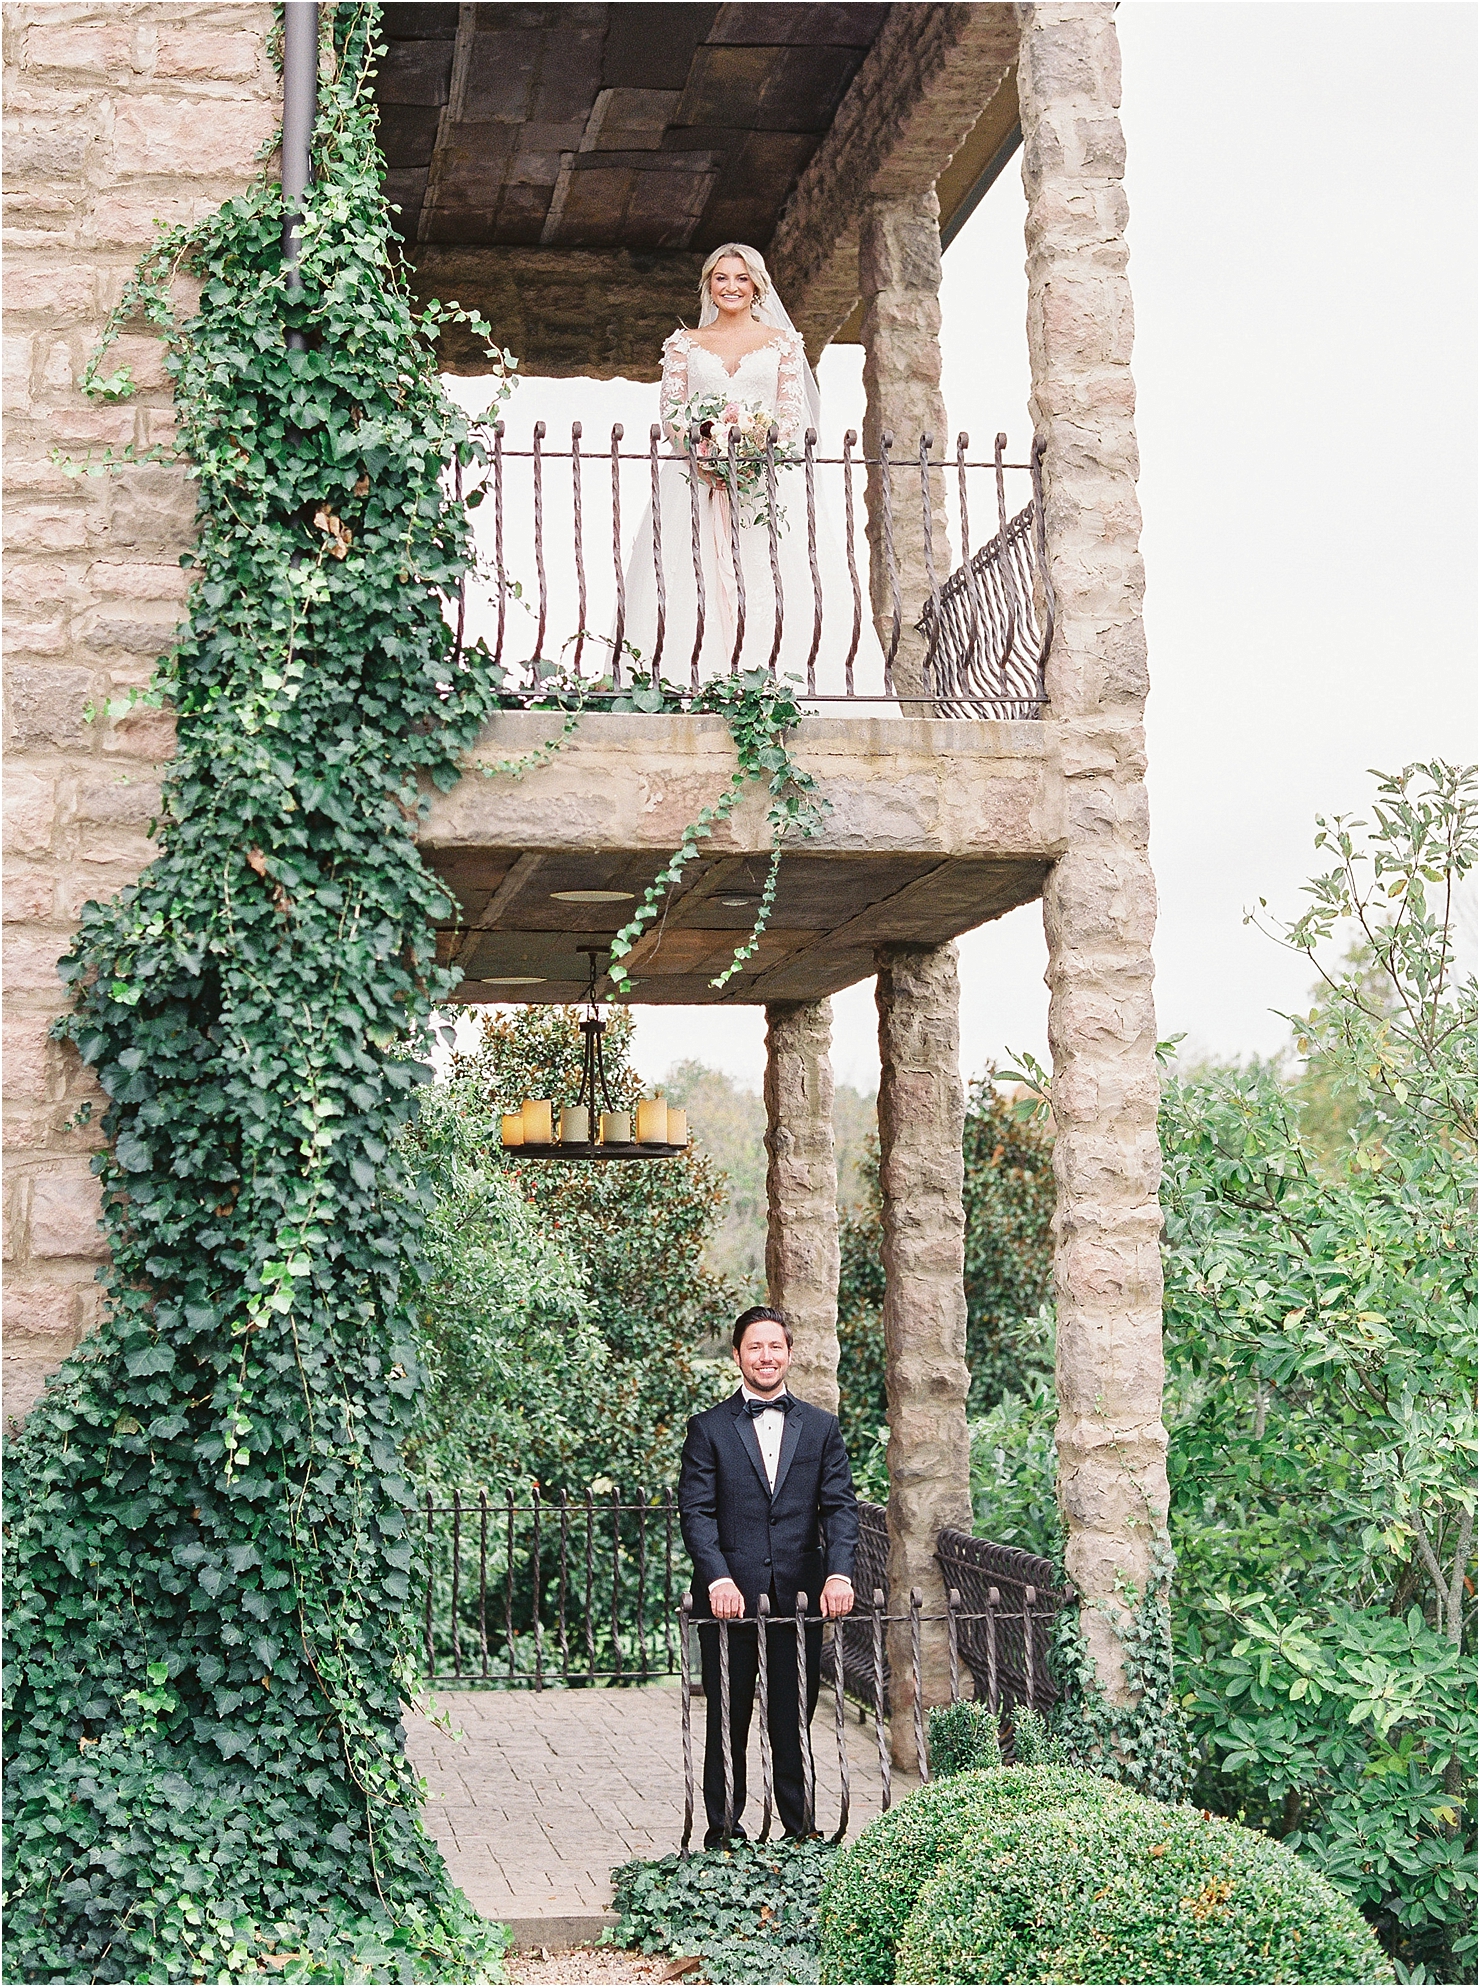 French Architecture Chateau Chateau Selah Madeline Trent Romantic Wedding Photographer